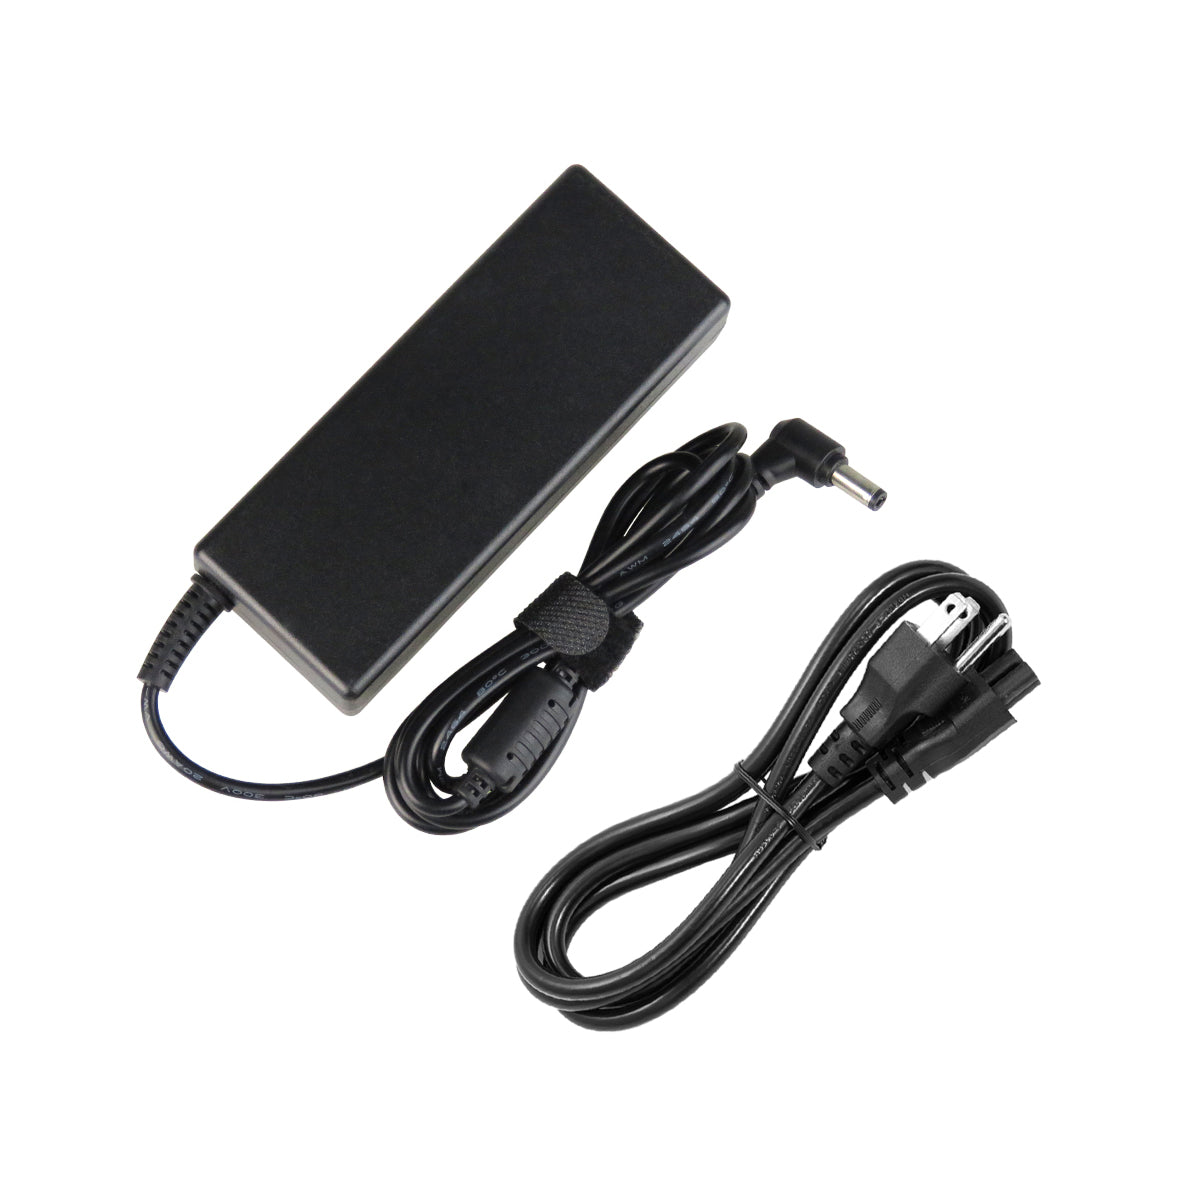 AC Adapter Charger for ASUS F52Q Notebook.